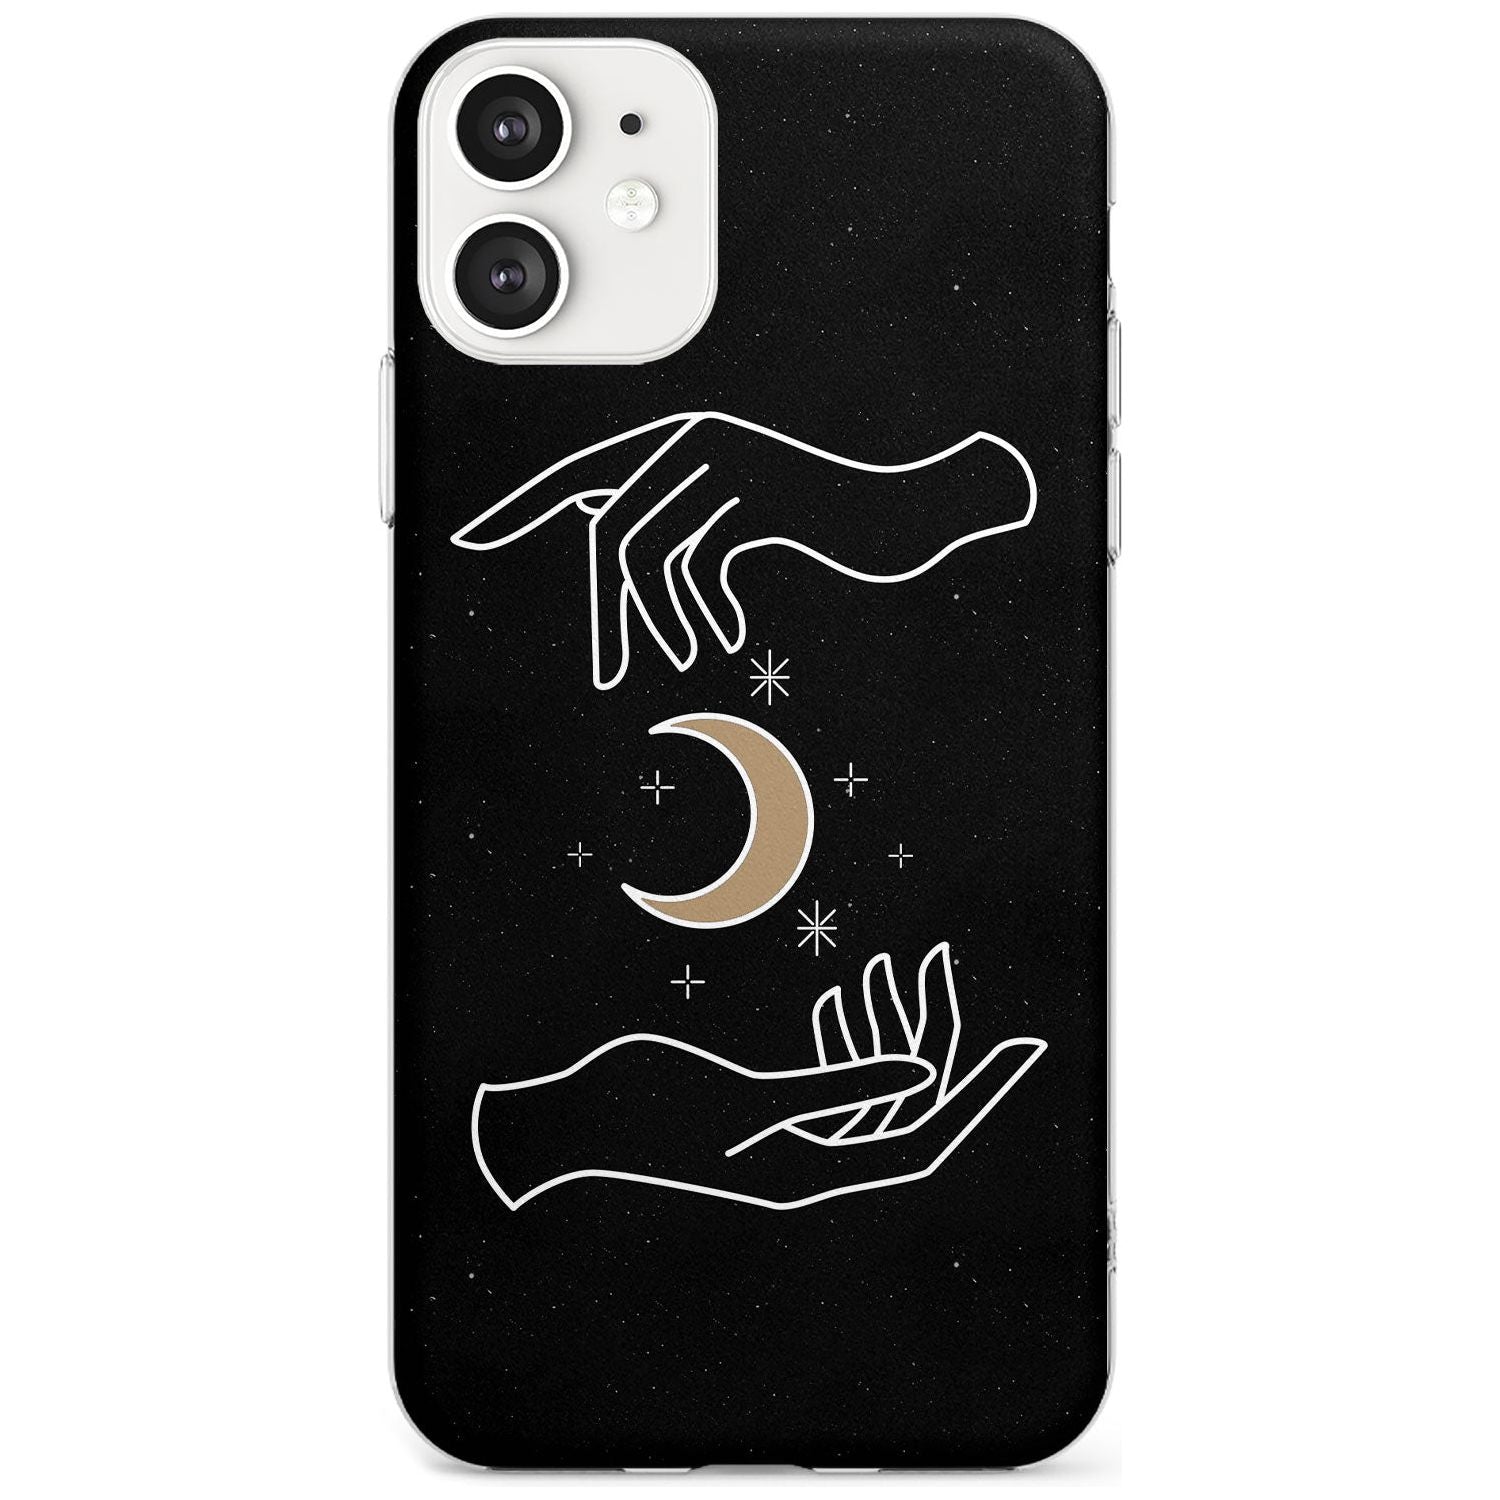 Hands Surrounding Moon Black Impact Phone Case for iPhone 11